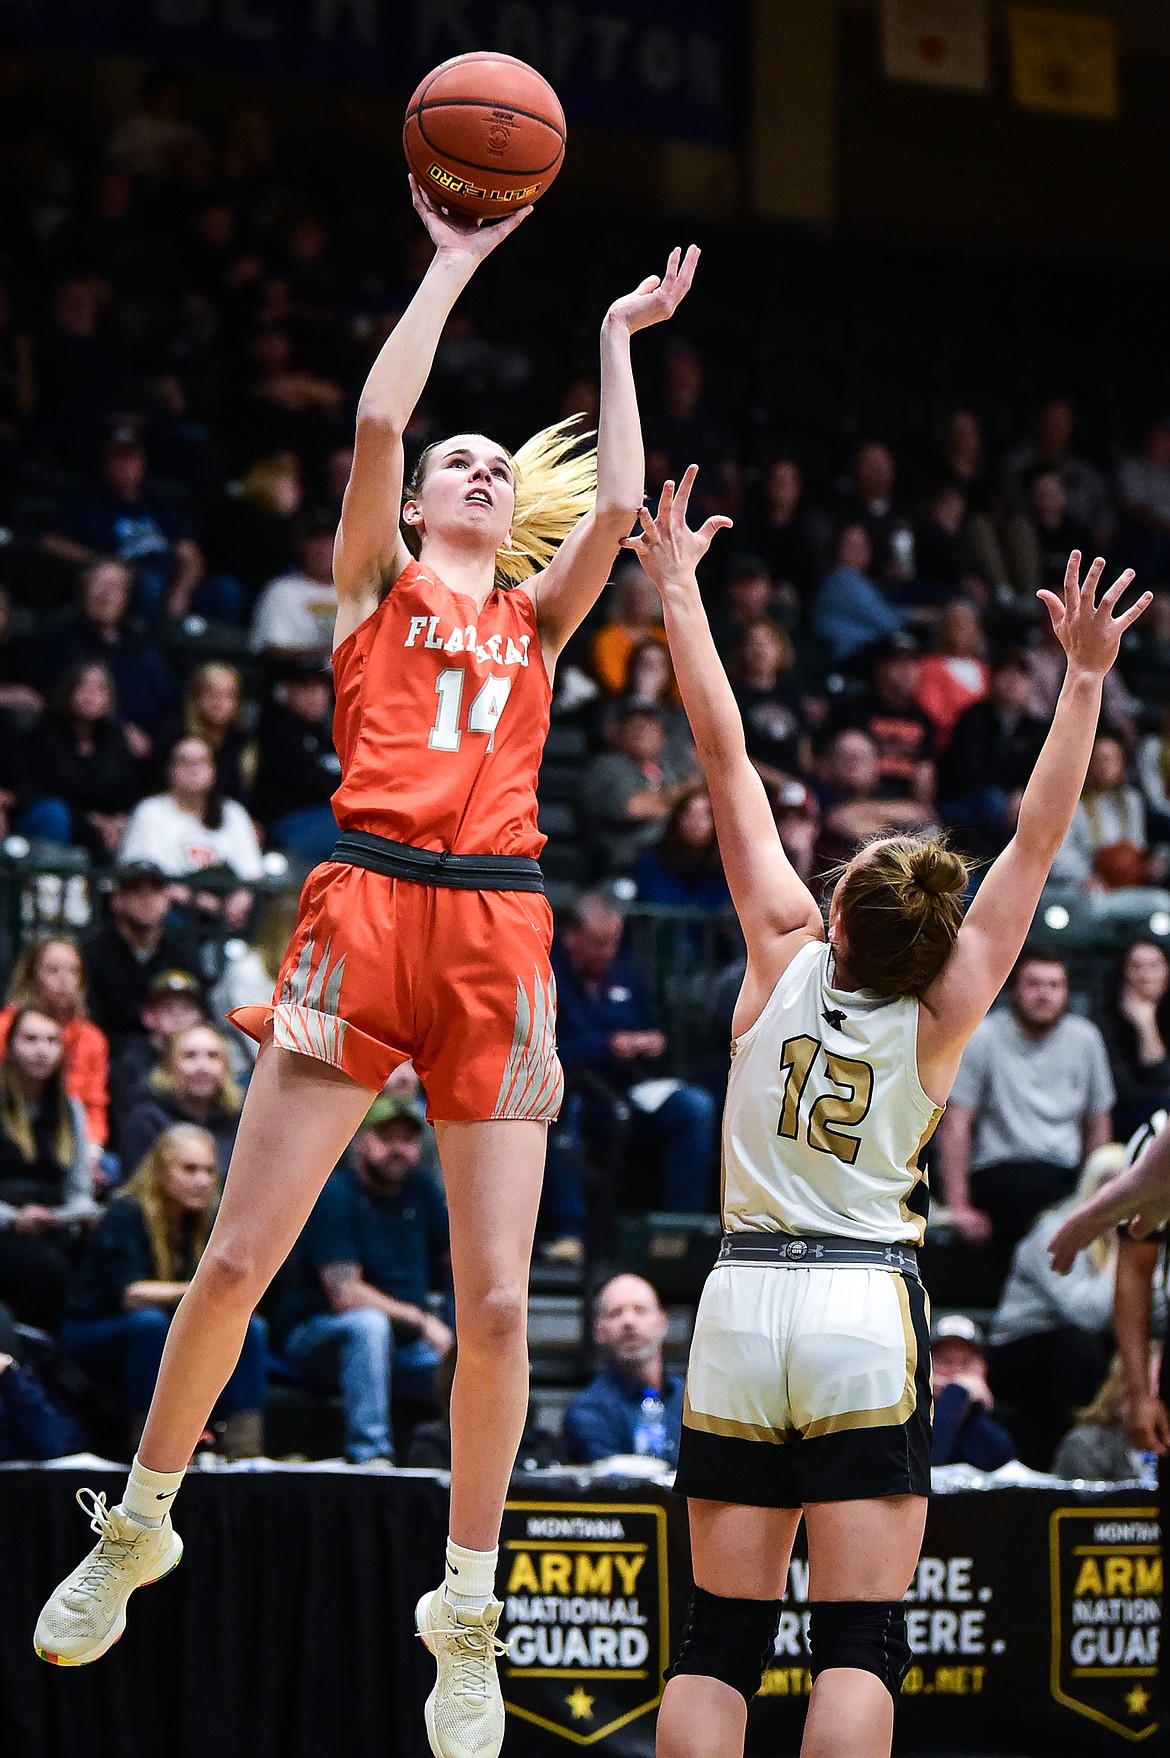 Flathead's Kennedy Moore (14) shoots over Billings West's Maria Ackerman (12) in the first half of the girls' Class AA state basketball championship at the Butte Civic Center on Saturday, March 11. (Casey Kreider/Daily Inter Lake)